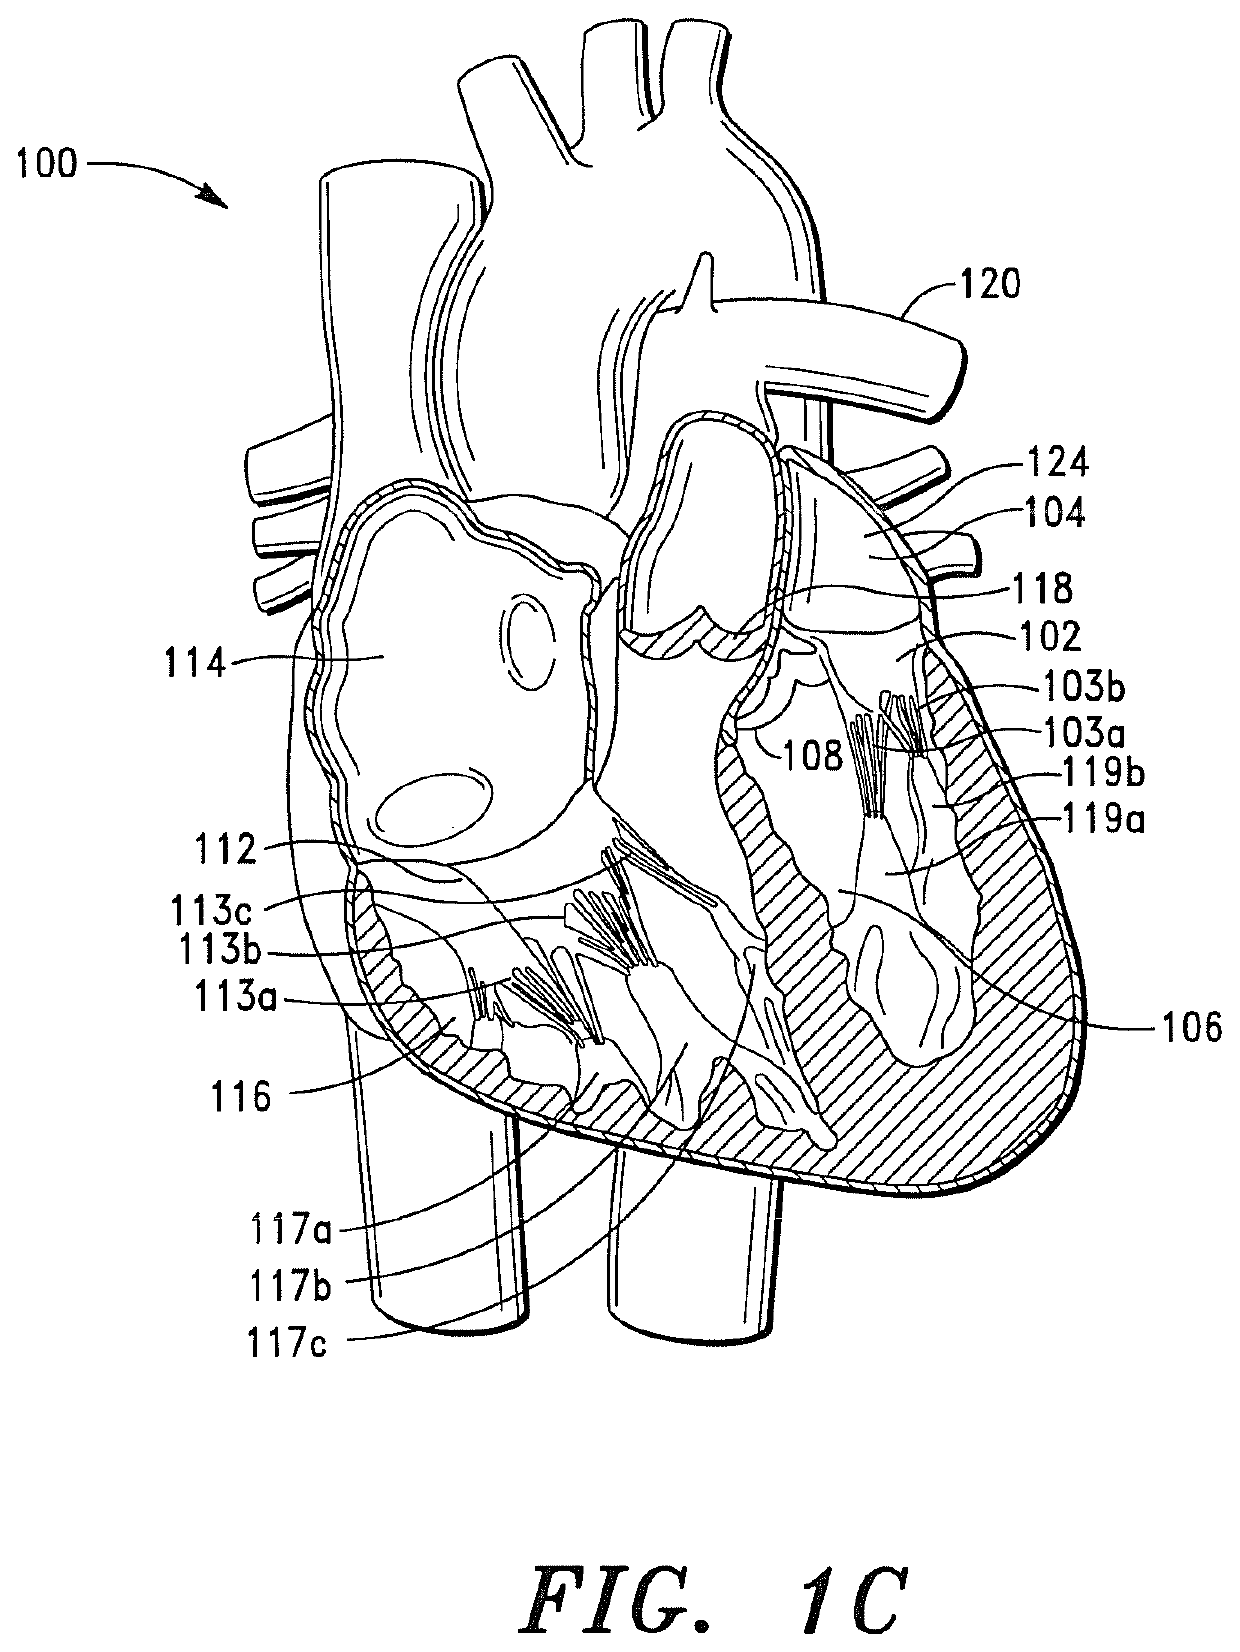 Prosthetic cardiovascular valves and methods for replacing native atrioventricular valves with same